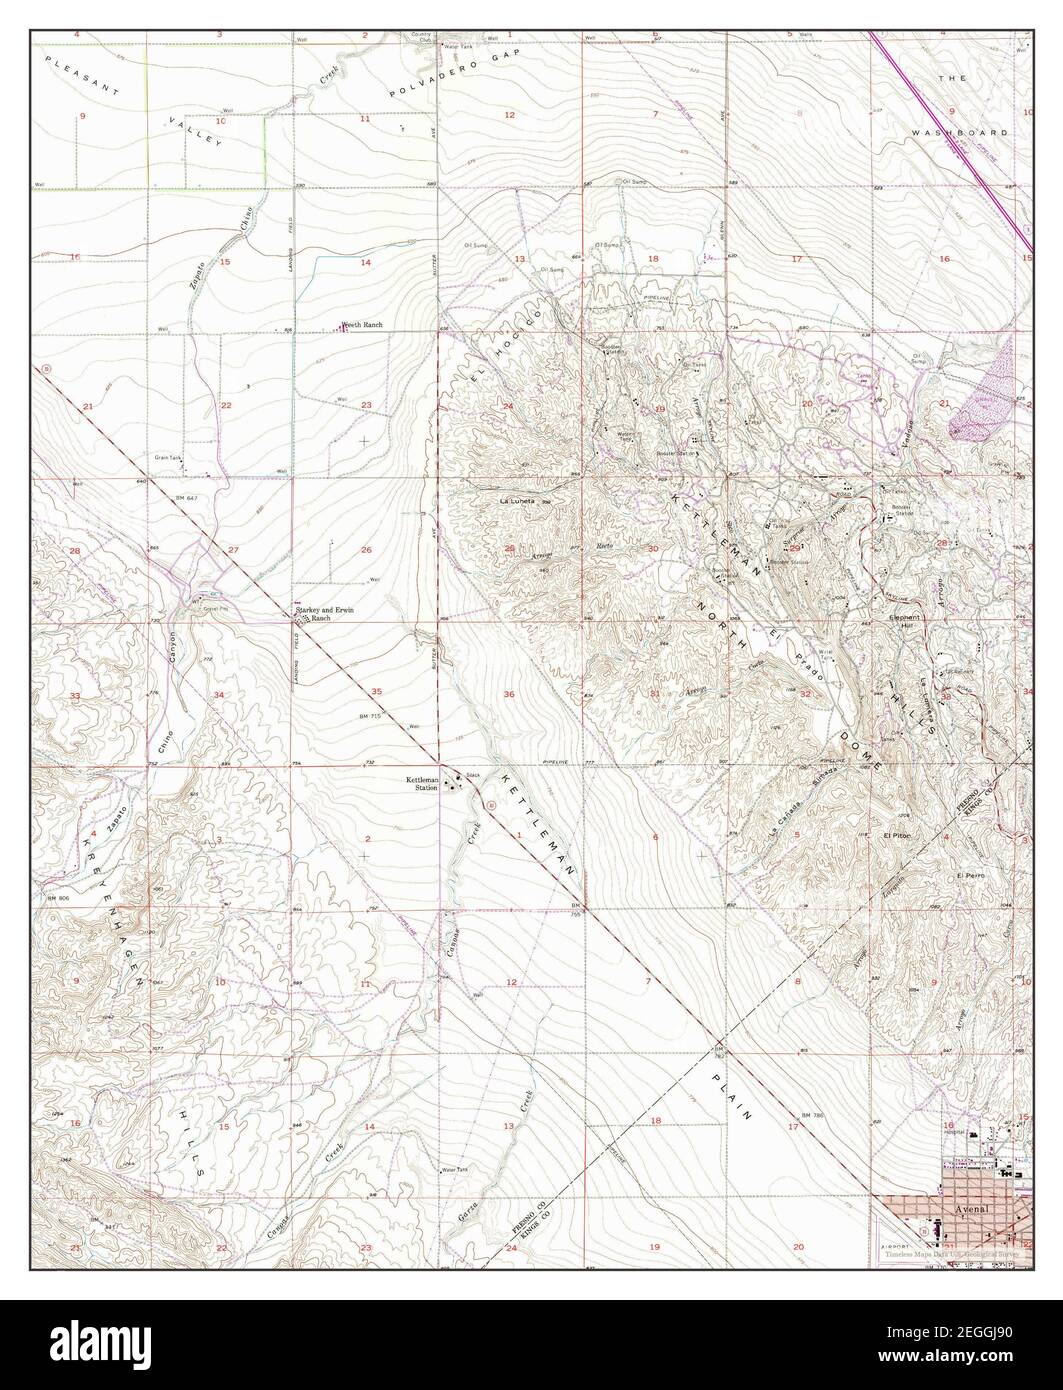 Avenal, California, map 1954, 1:24000, United States of America by Timeless Maps, data U.S. Geological Survey Stock Photo